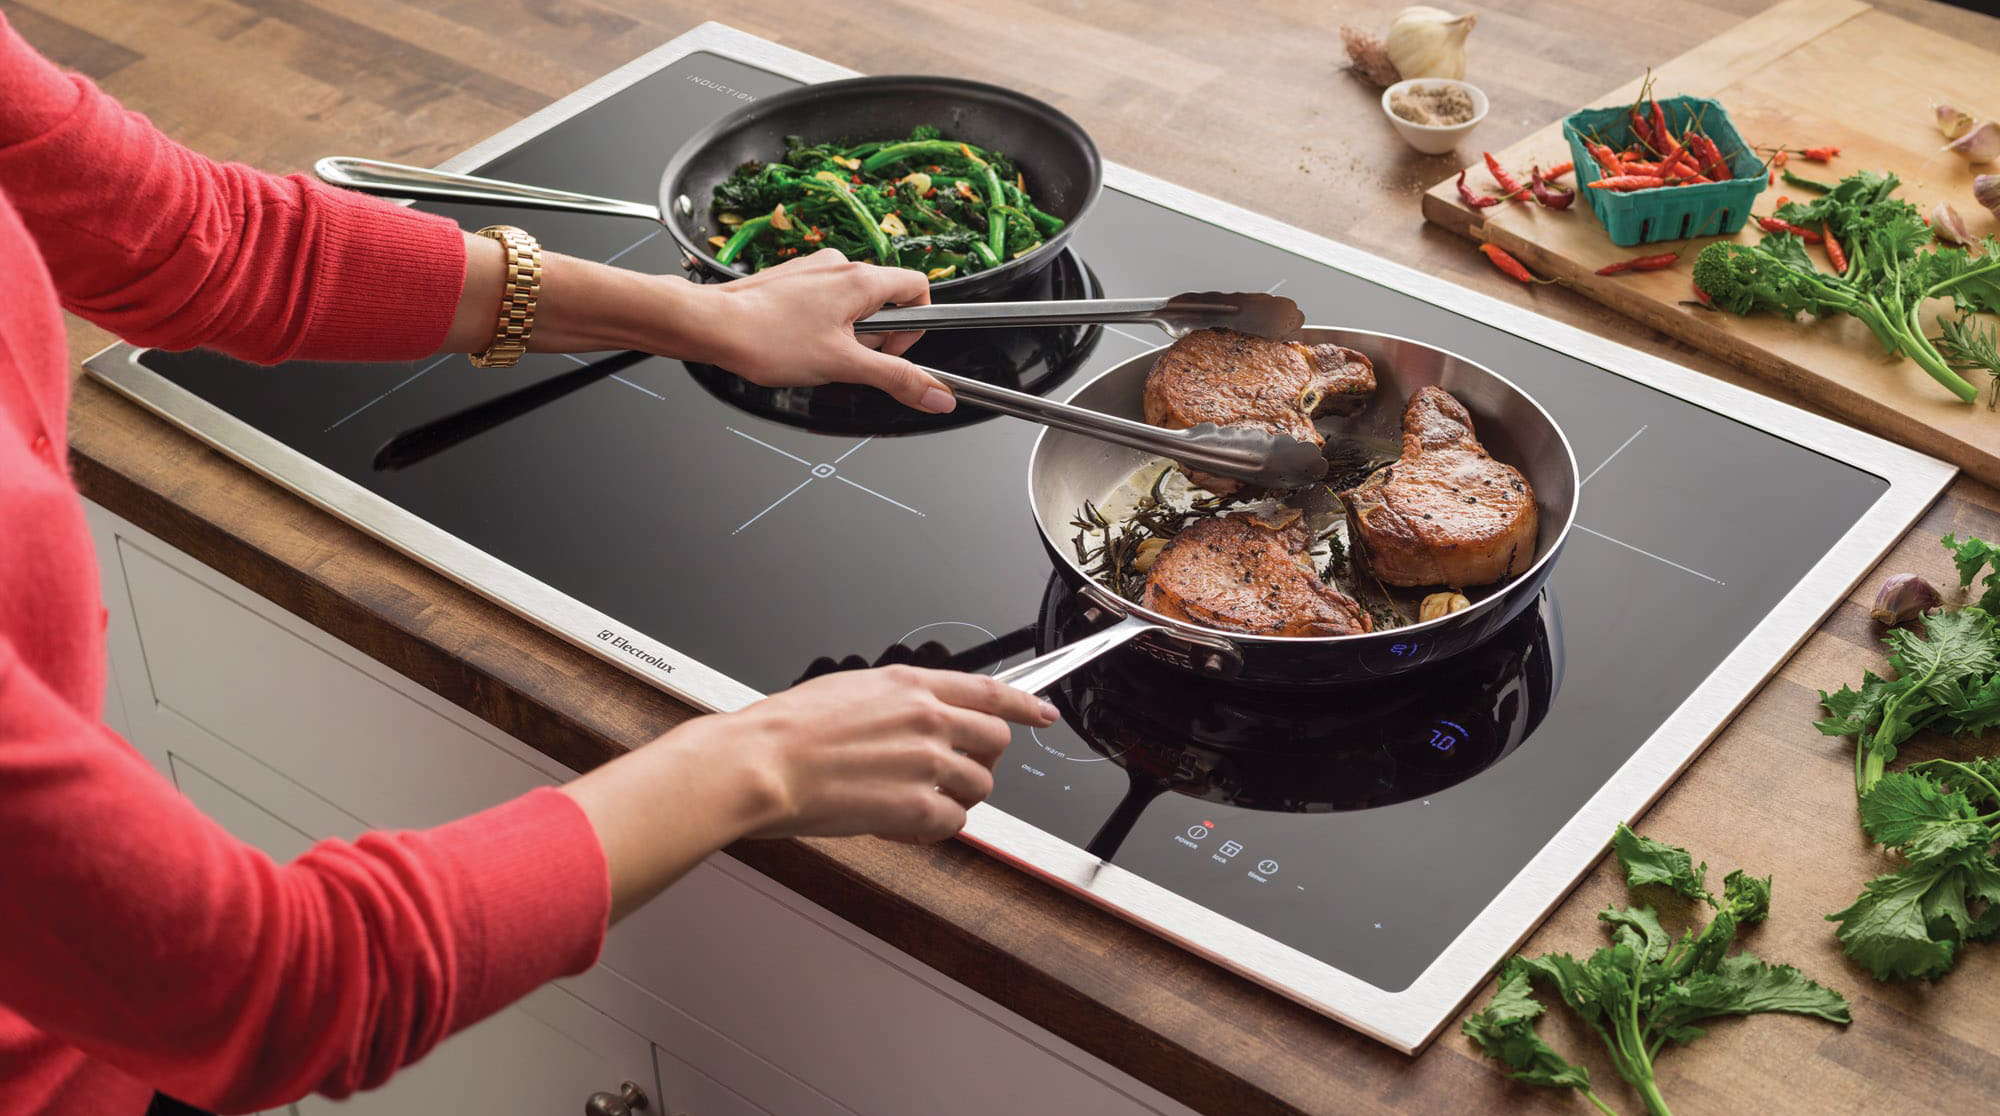 Cooking on electric cooktop